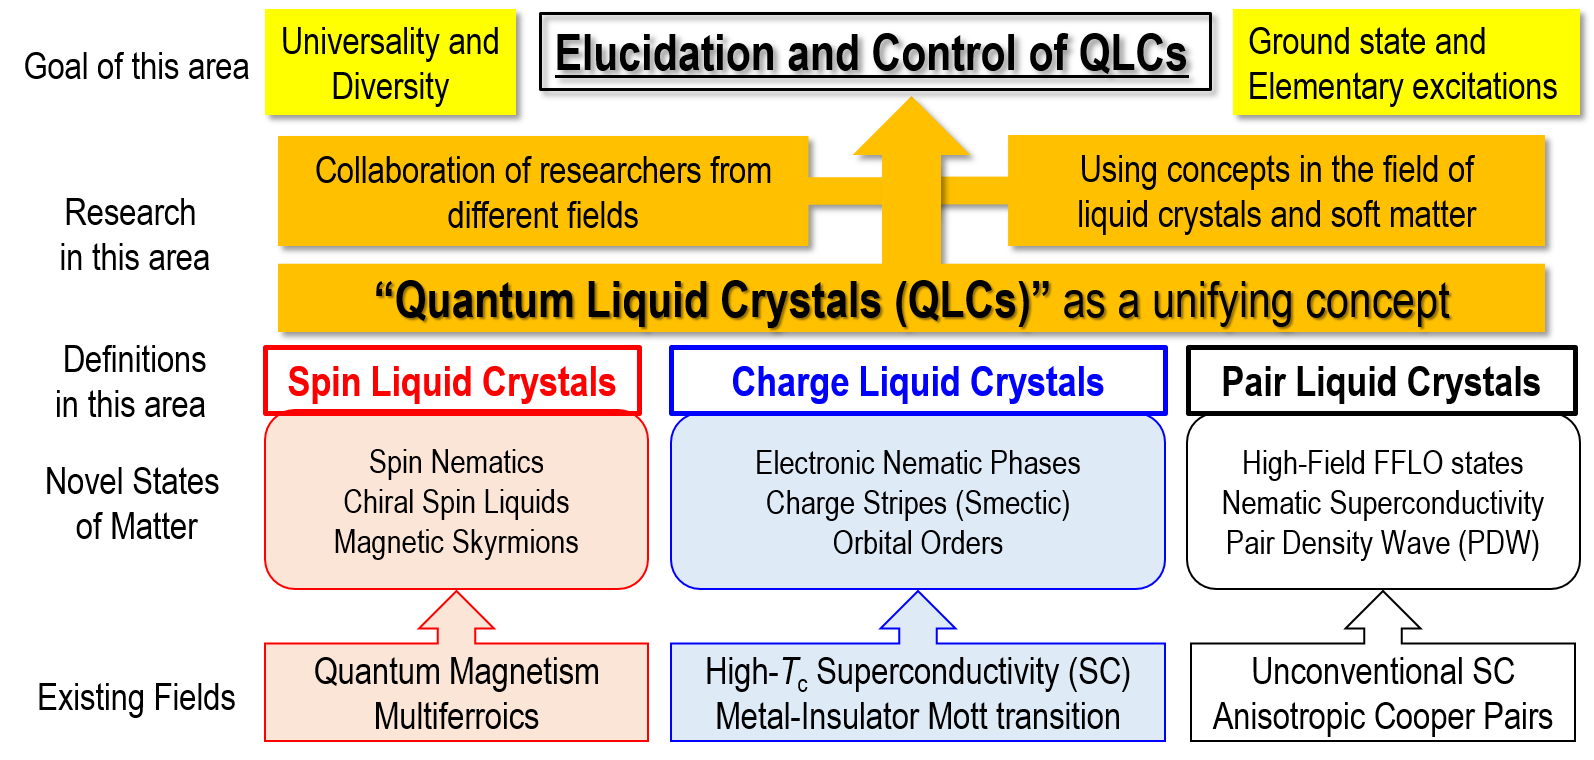 Toward elucidation and control of QLCs